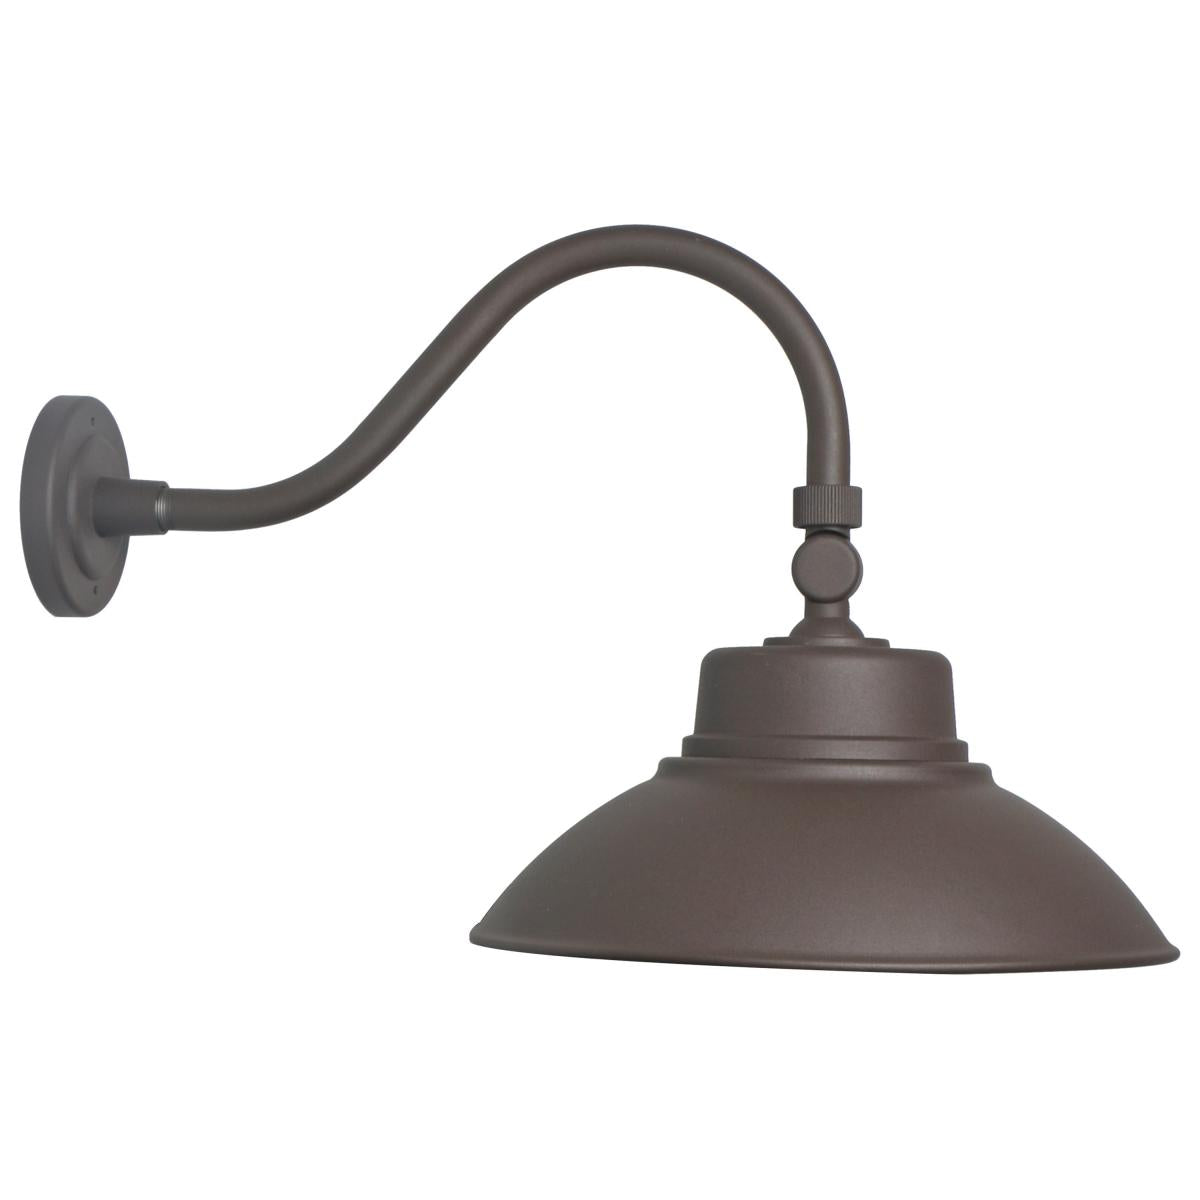 LED Gooseneck Fixture, Wattage and CCT Selectable, 5500 Lumen Max, Integrated Photocell, 120-277V, Finish Bronze